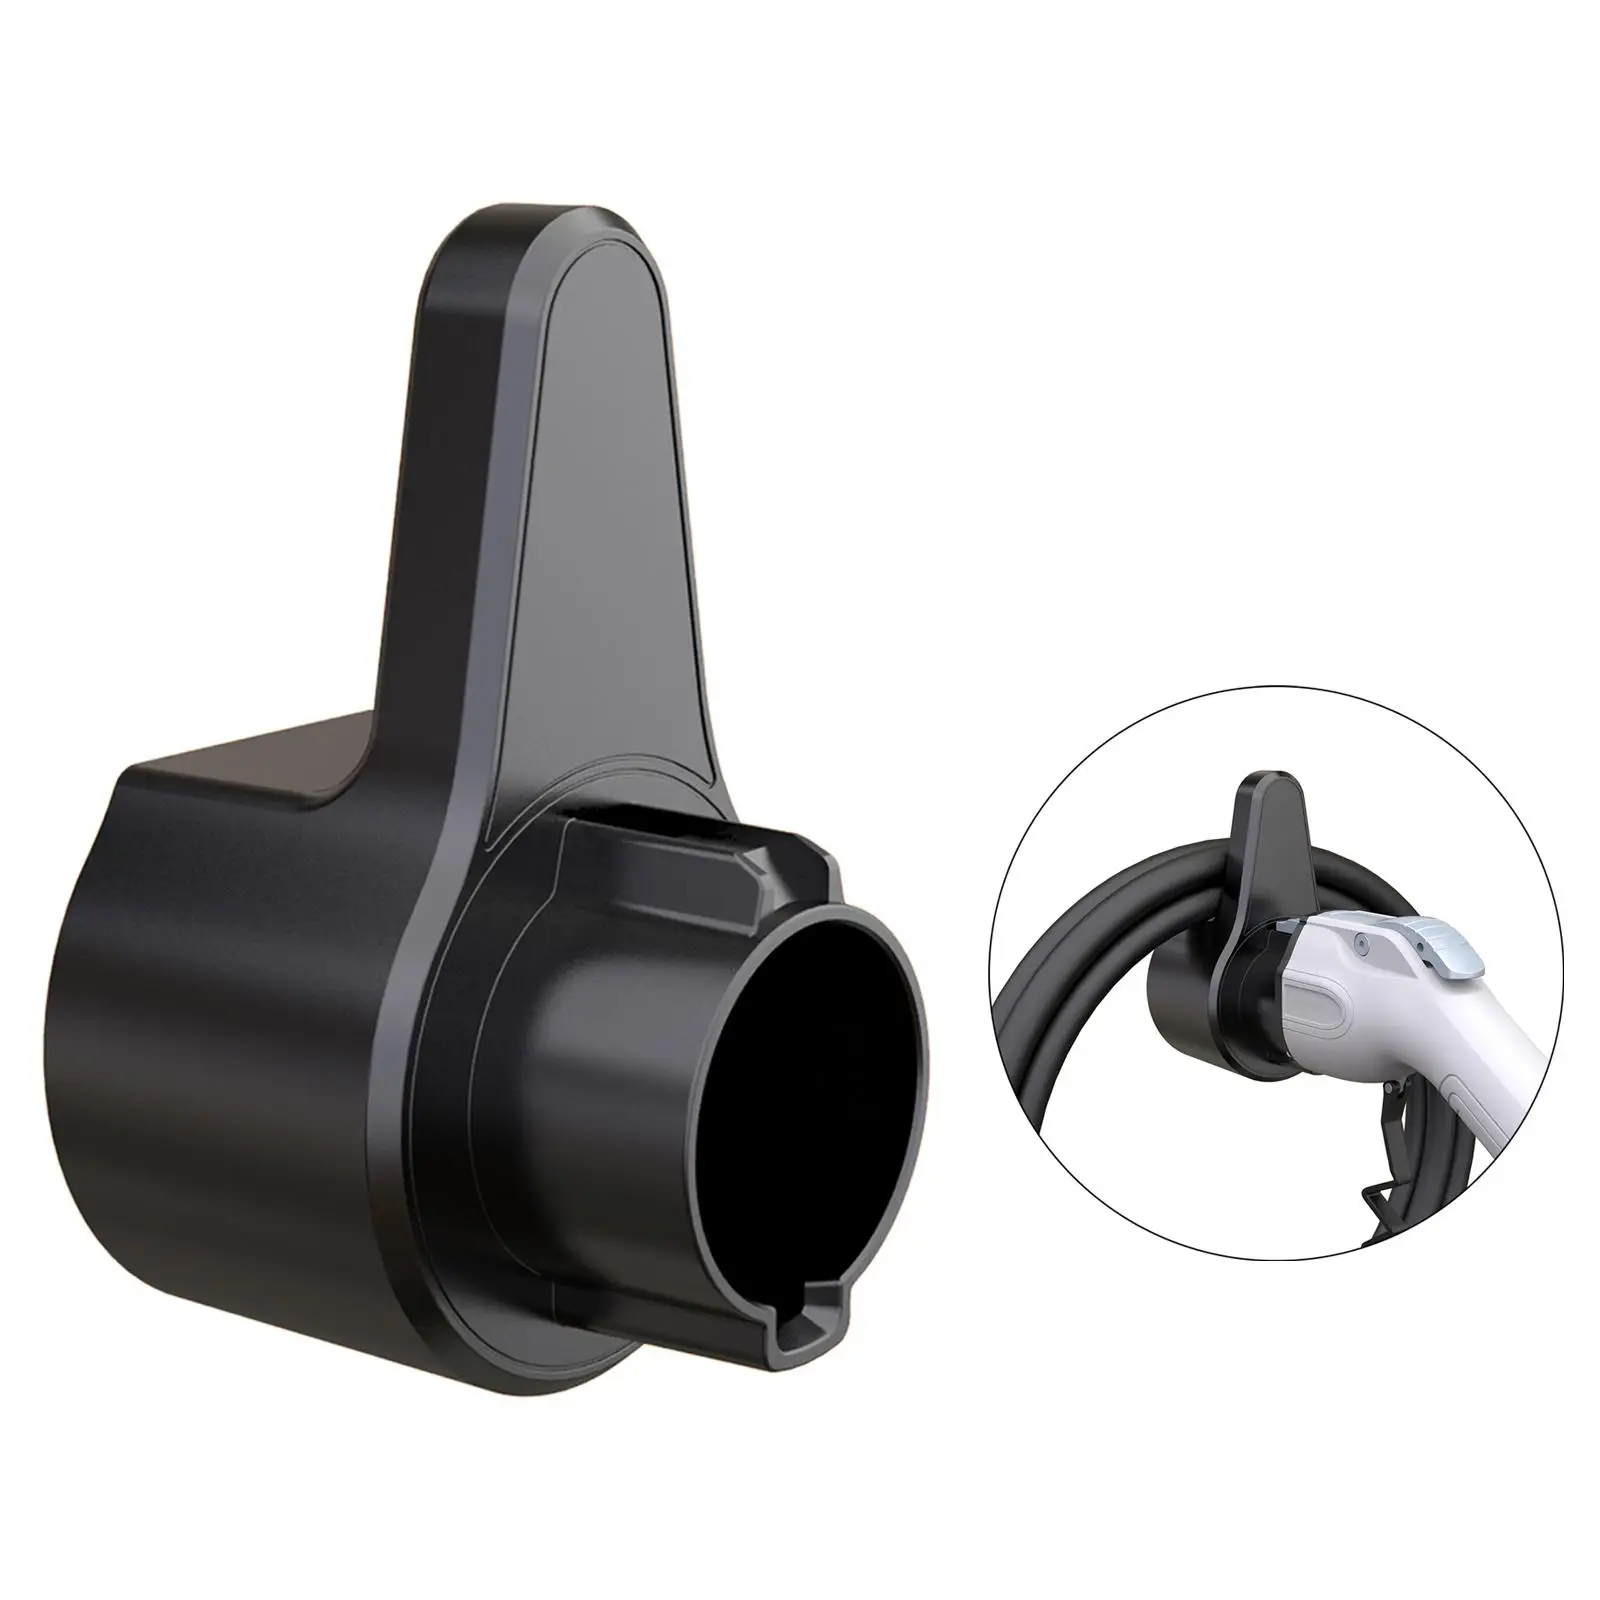 Level 2 Waterproof Charger Station Accessories Socket Charging Holder